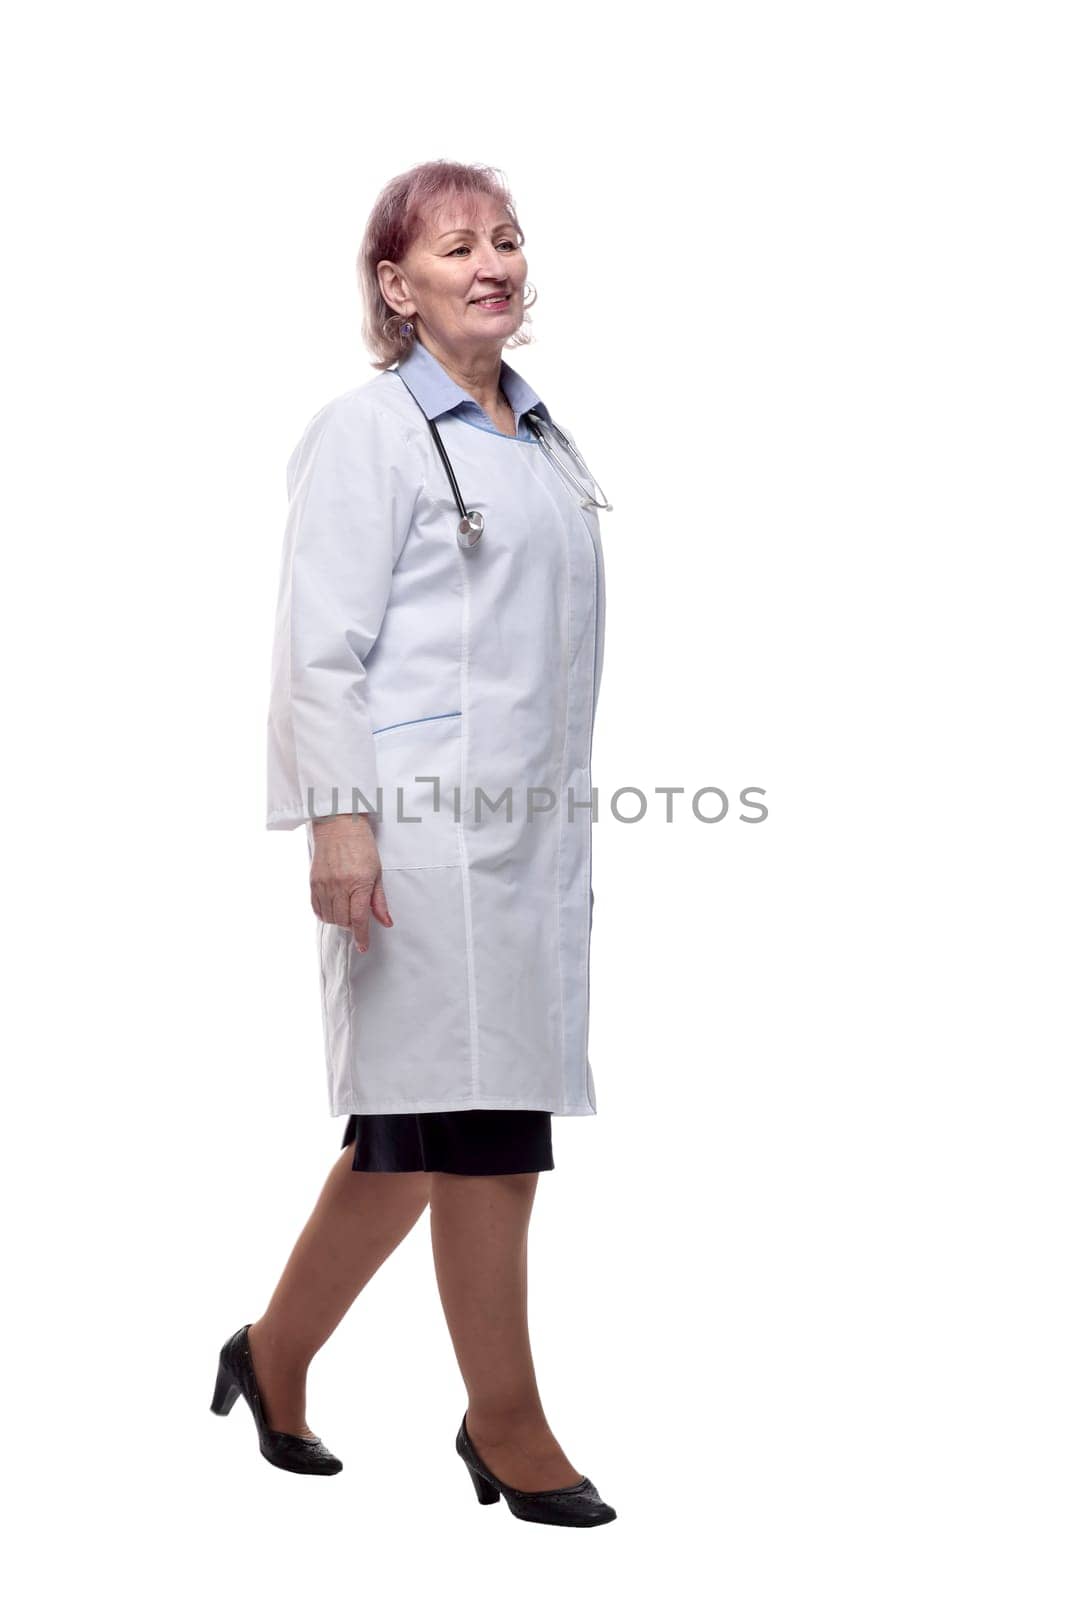 in full growth. a smiling woman doctor striding forward . isolated on a white background